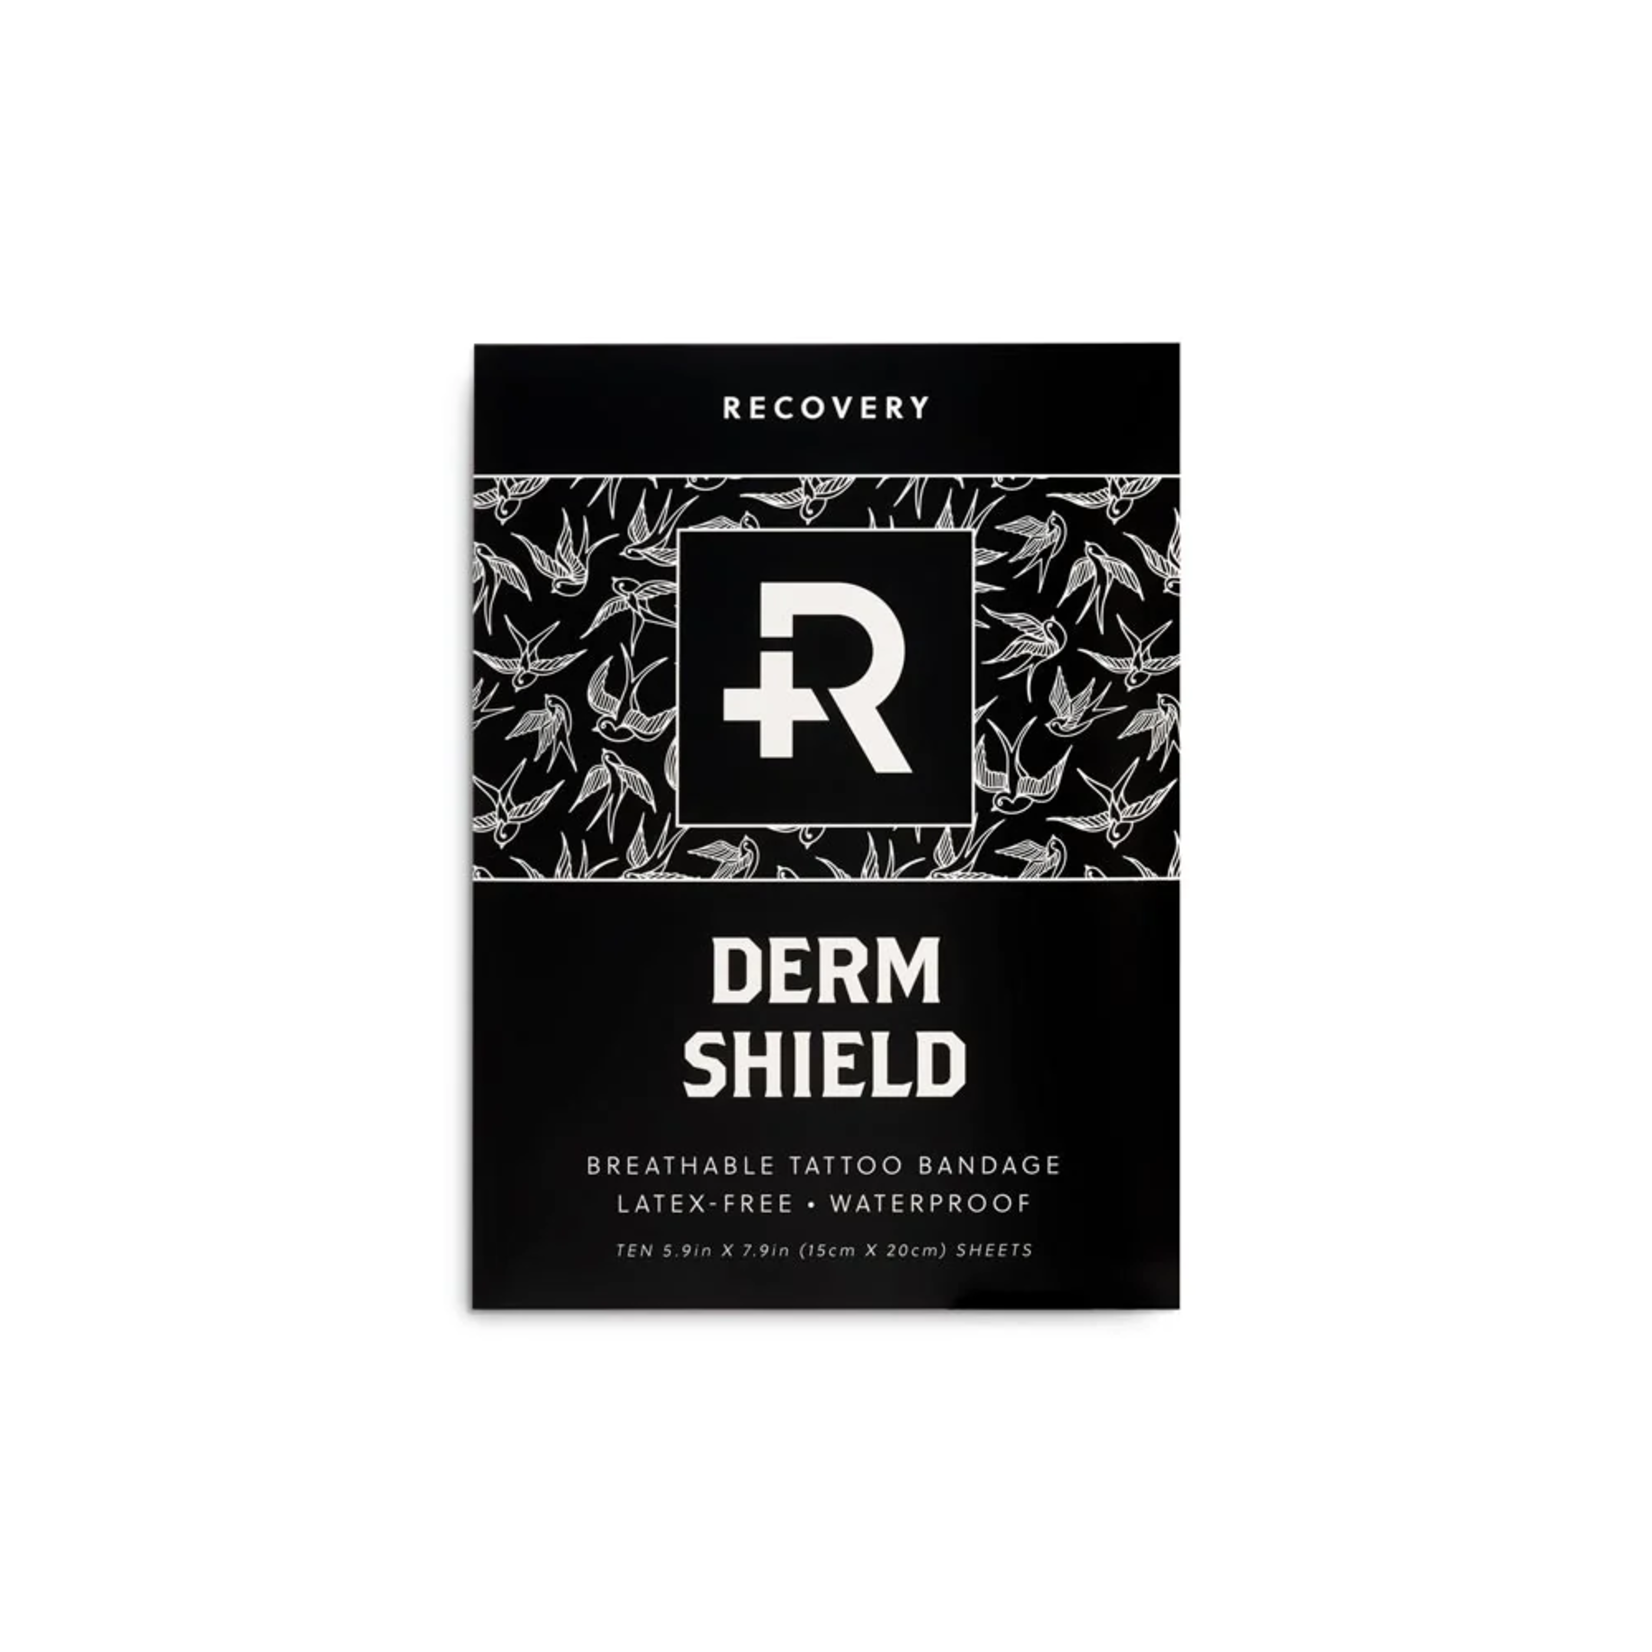 RECOVERY DERM SHIELD – TATTOO ADHESIVE FILM – 5.9" X 7.9" SHEET PACK